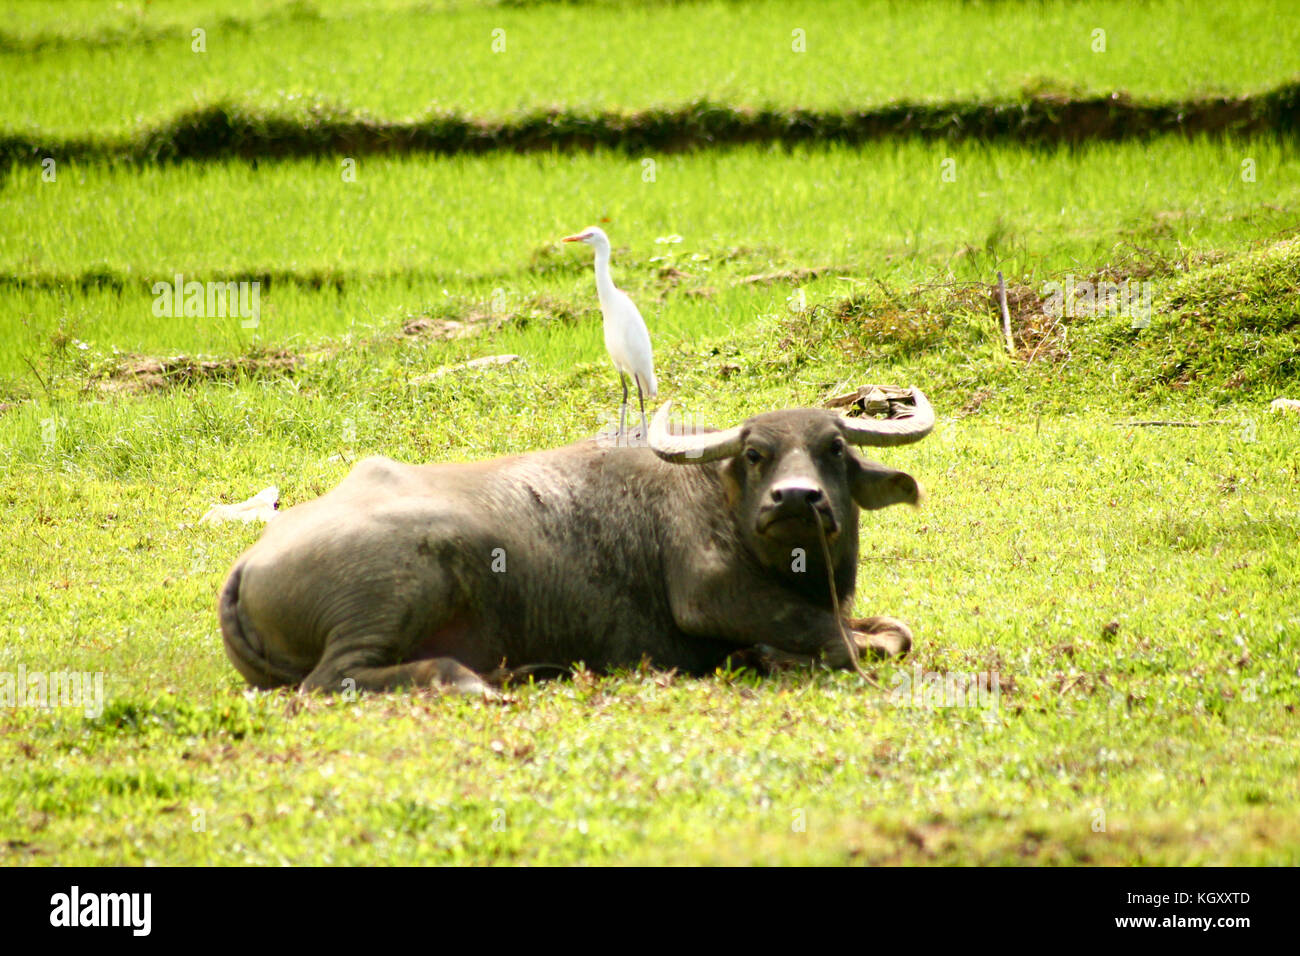 A common egret (Ardea alba) resting on a water buffaloes' back, candid genuine moment of rural life, slow living and unexpected friendship Stock Photo